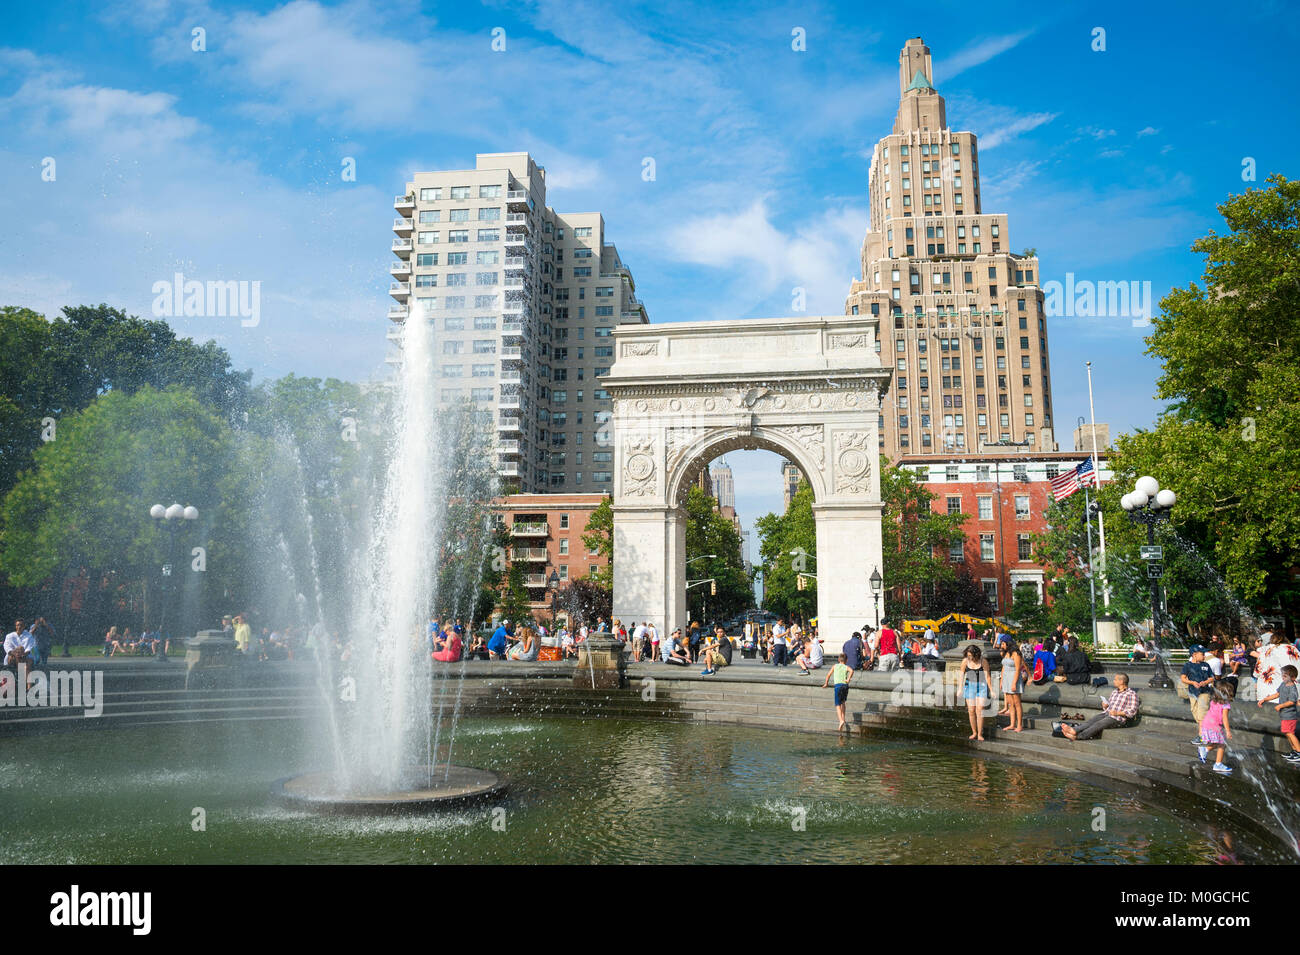 Scenic sunny summer afternoon view of the fountain and arch at Washington Square Park in Greenwich Village, downtown Manhattan, New York City Stock Photo